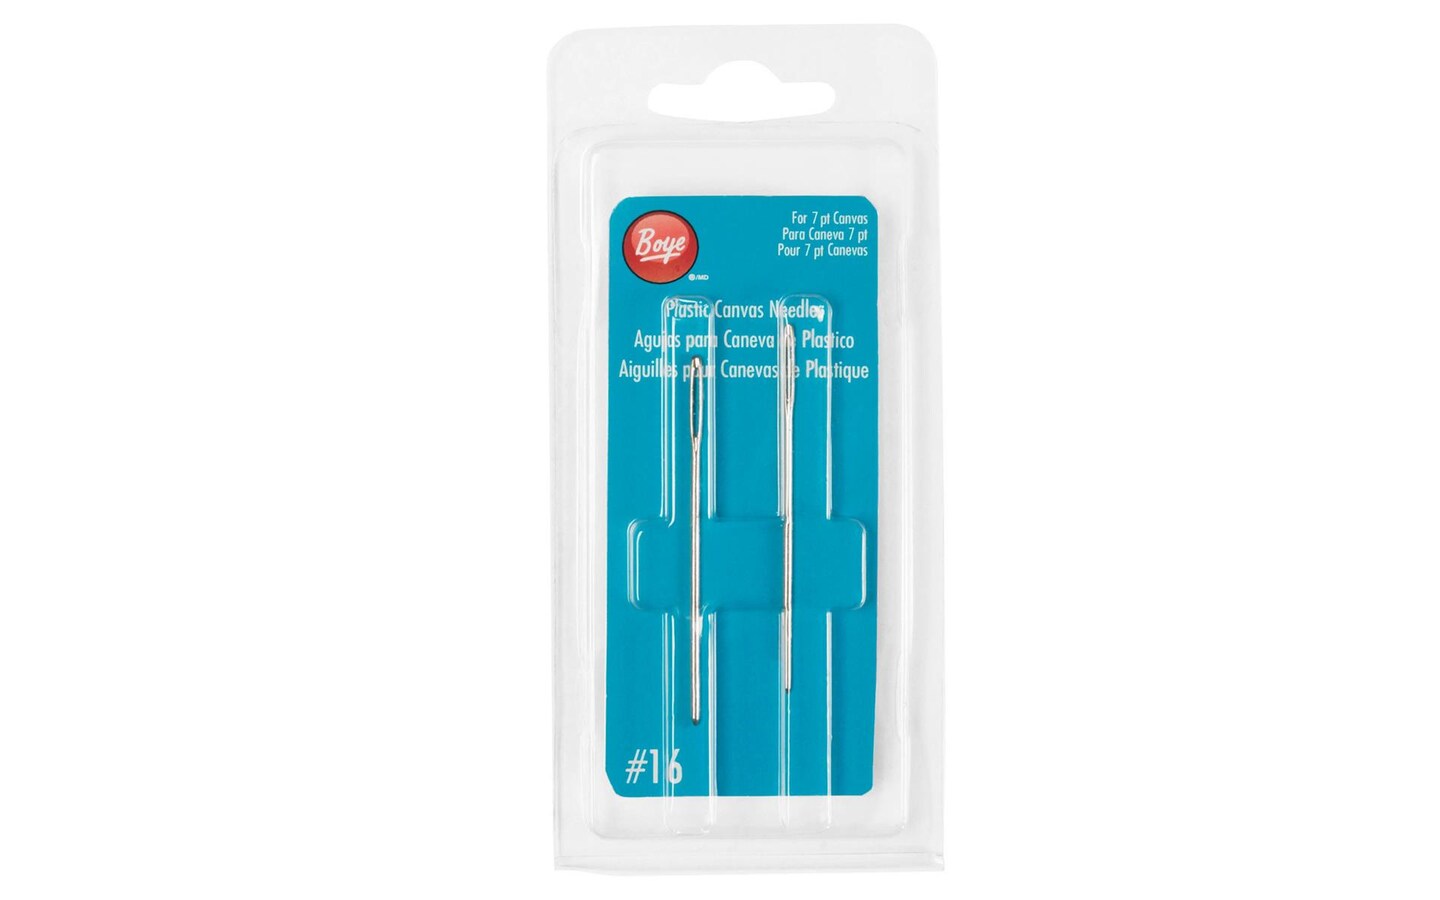 Needle Crafters #16 Needles for Plastic Canvas - MICA Store